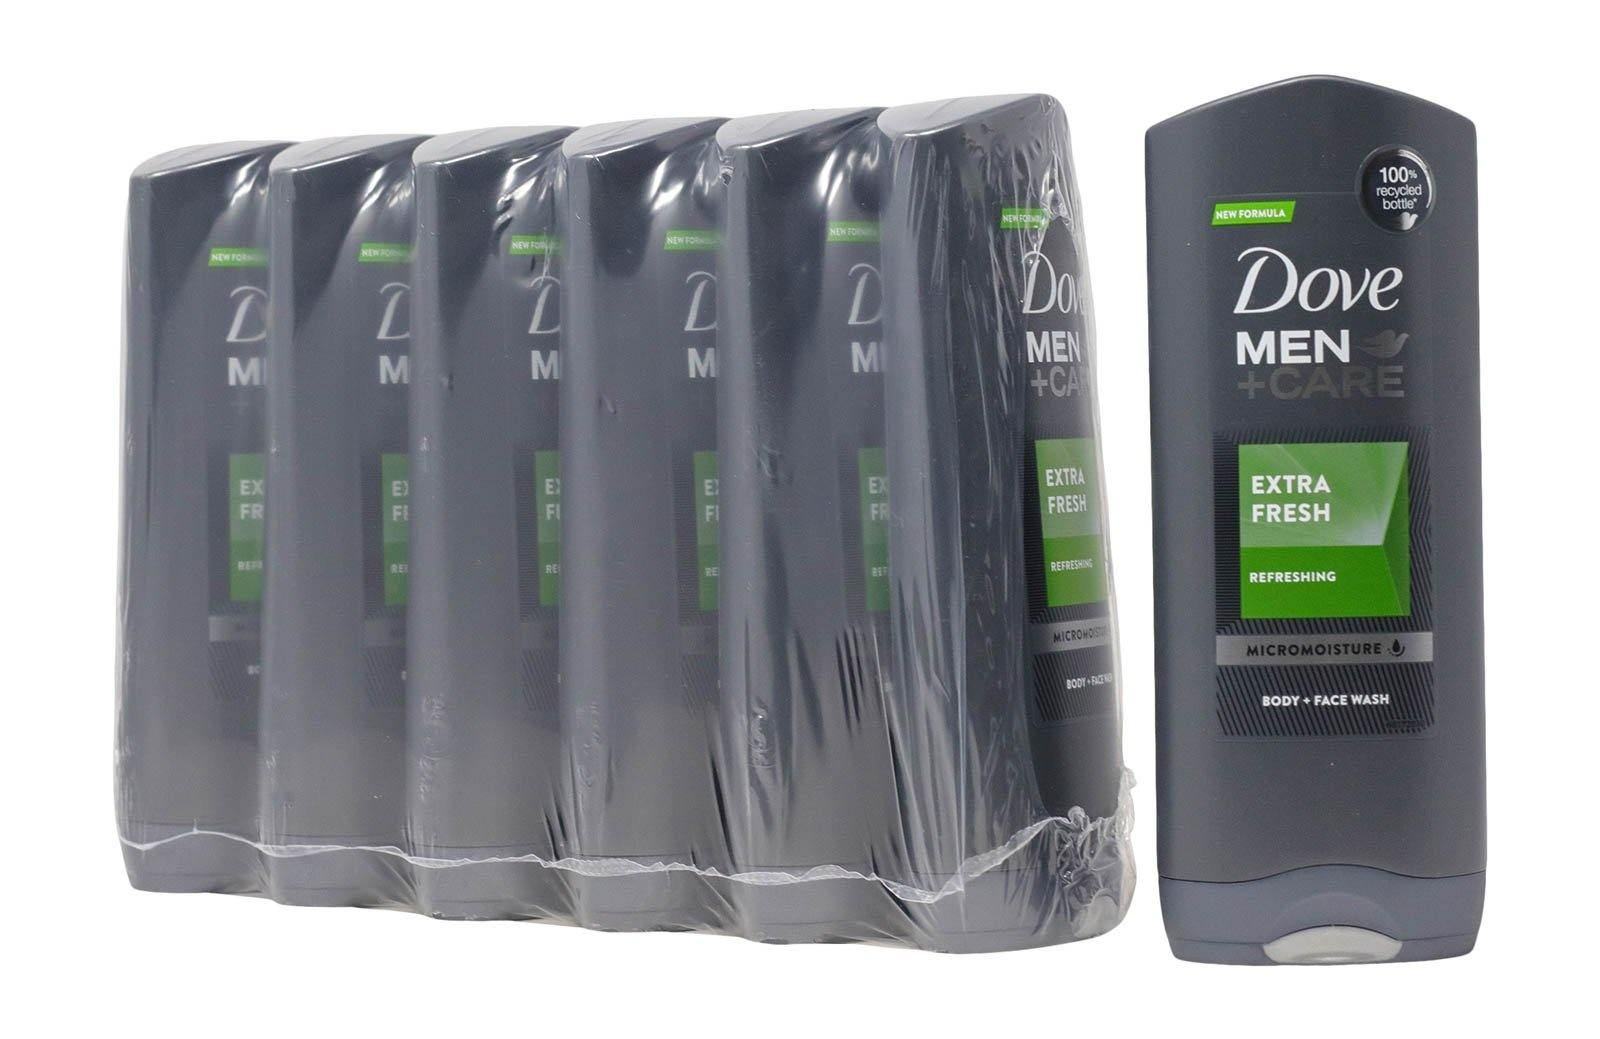 Dove Men Care Assorted Body and Face Wash Shower Gel, 400mL (13.5 oz)